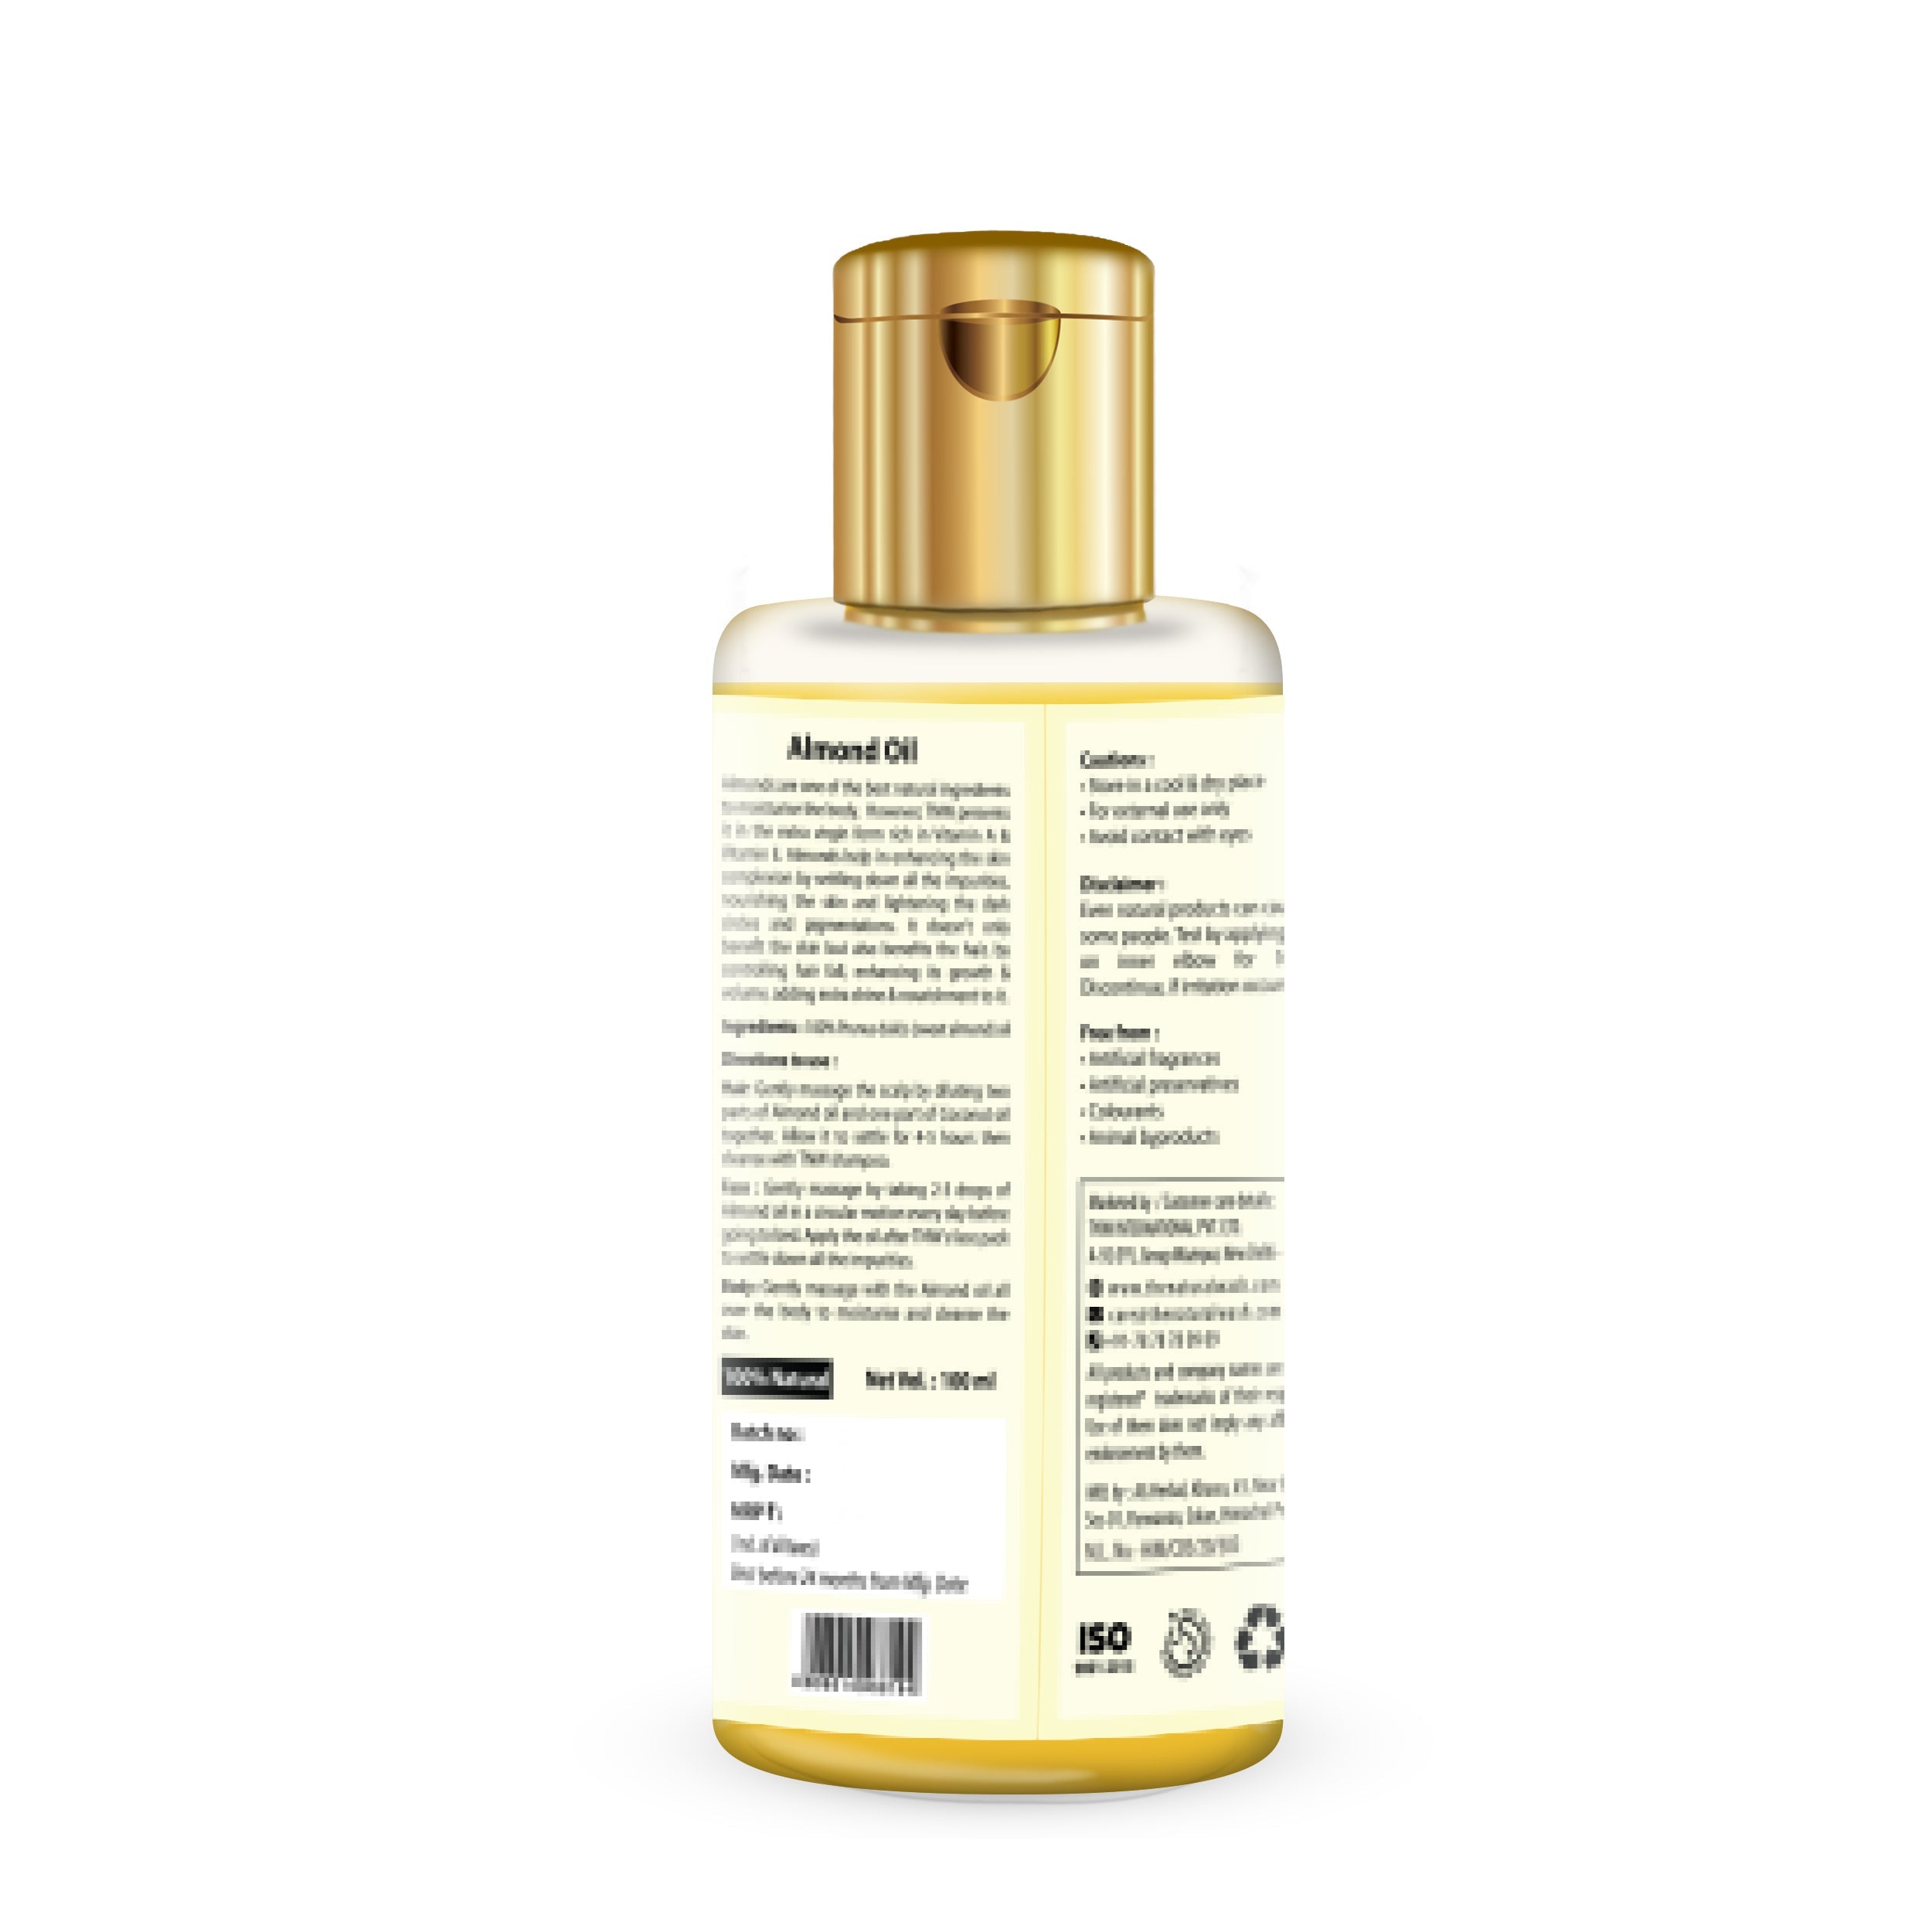 Virgin Almond Oil - Cold Pressed Oil For Skin & Hair (Pure & Natural).